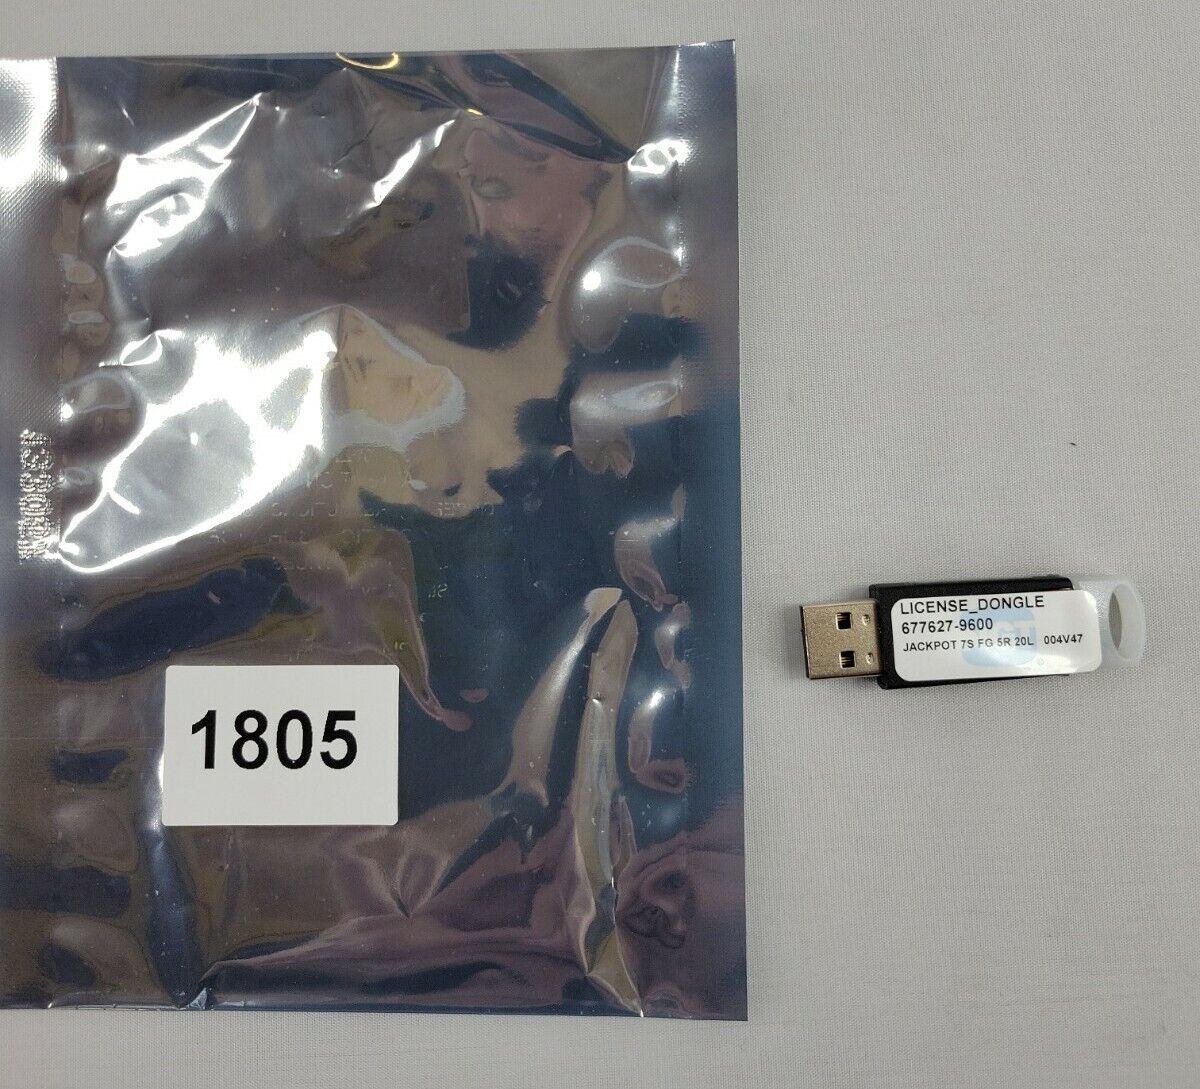 IGT Jackpot 7s 004V47  with License Dongle